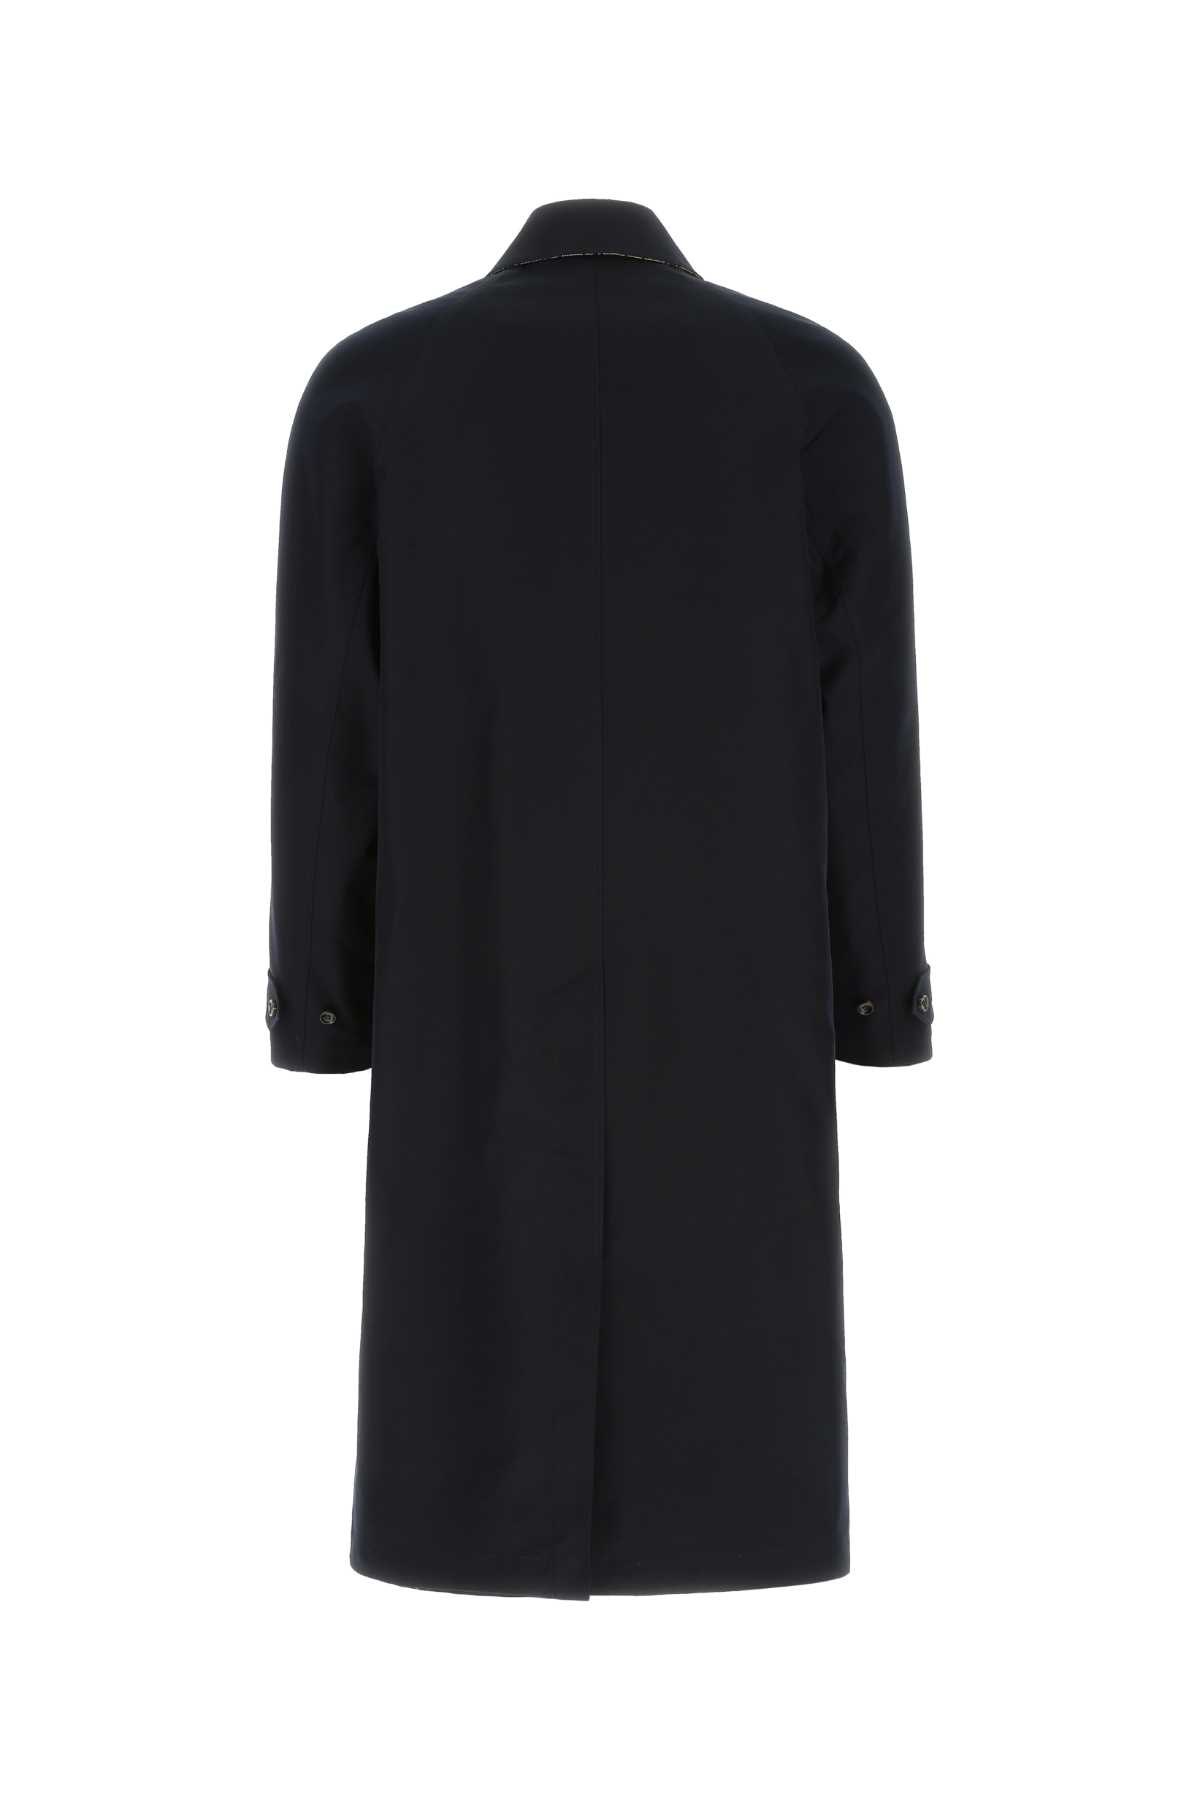 Shop Gucci Dark Blue Polyester Trench Coat